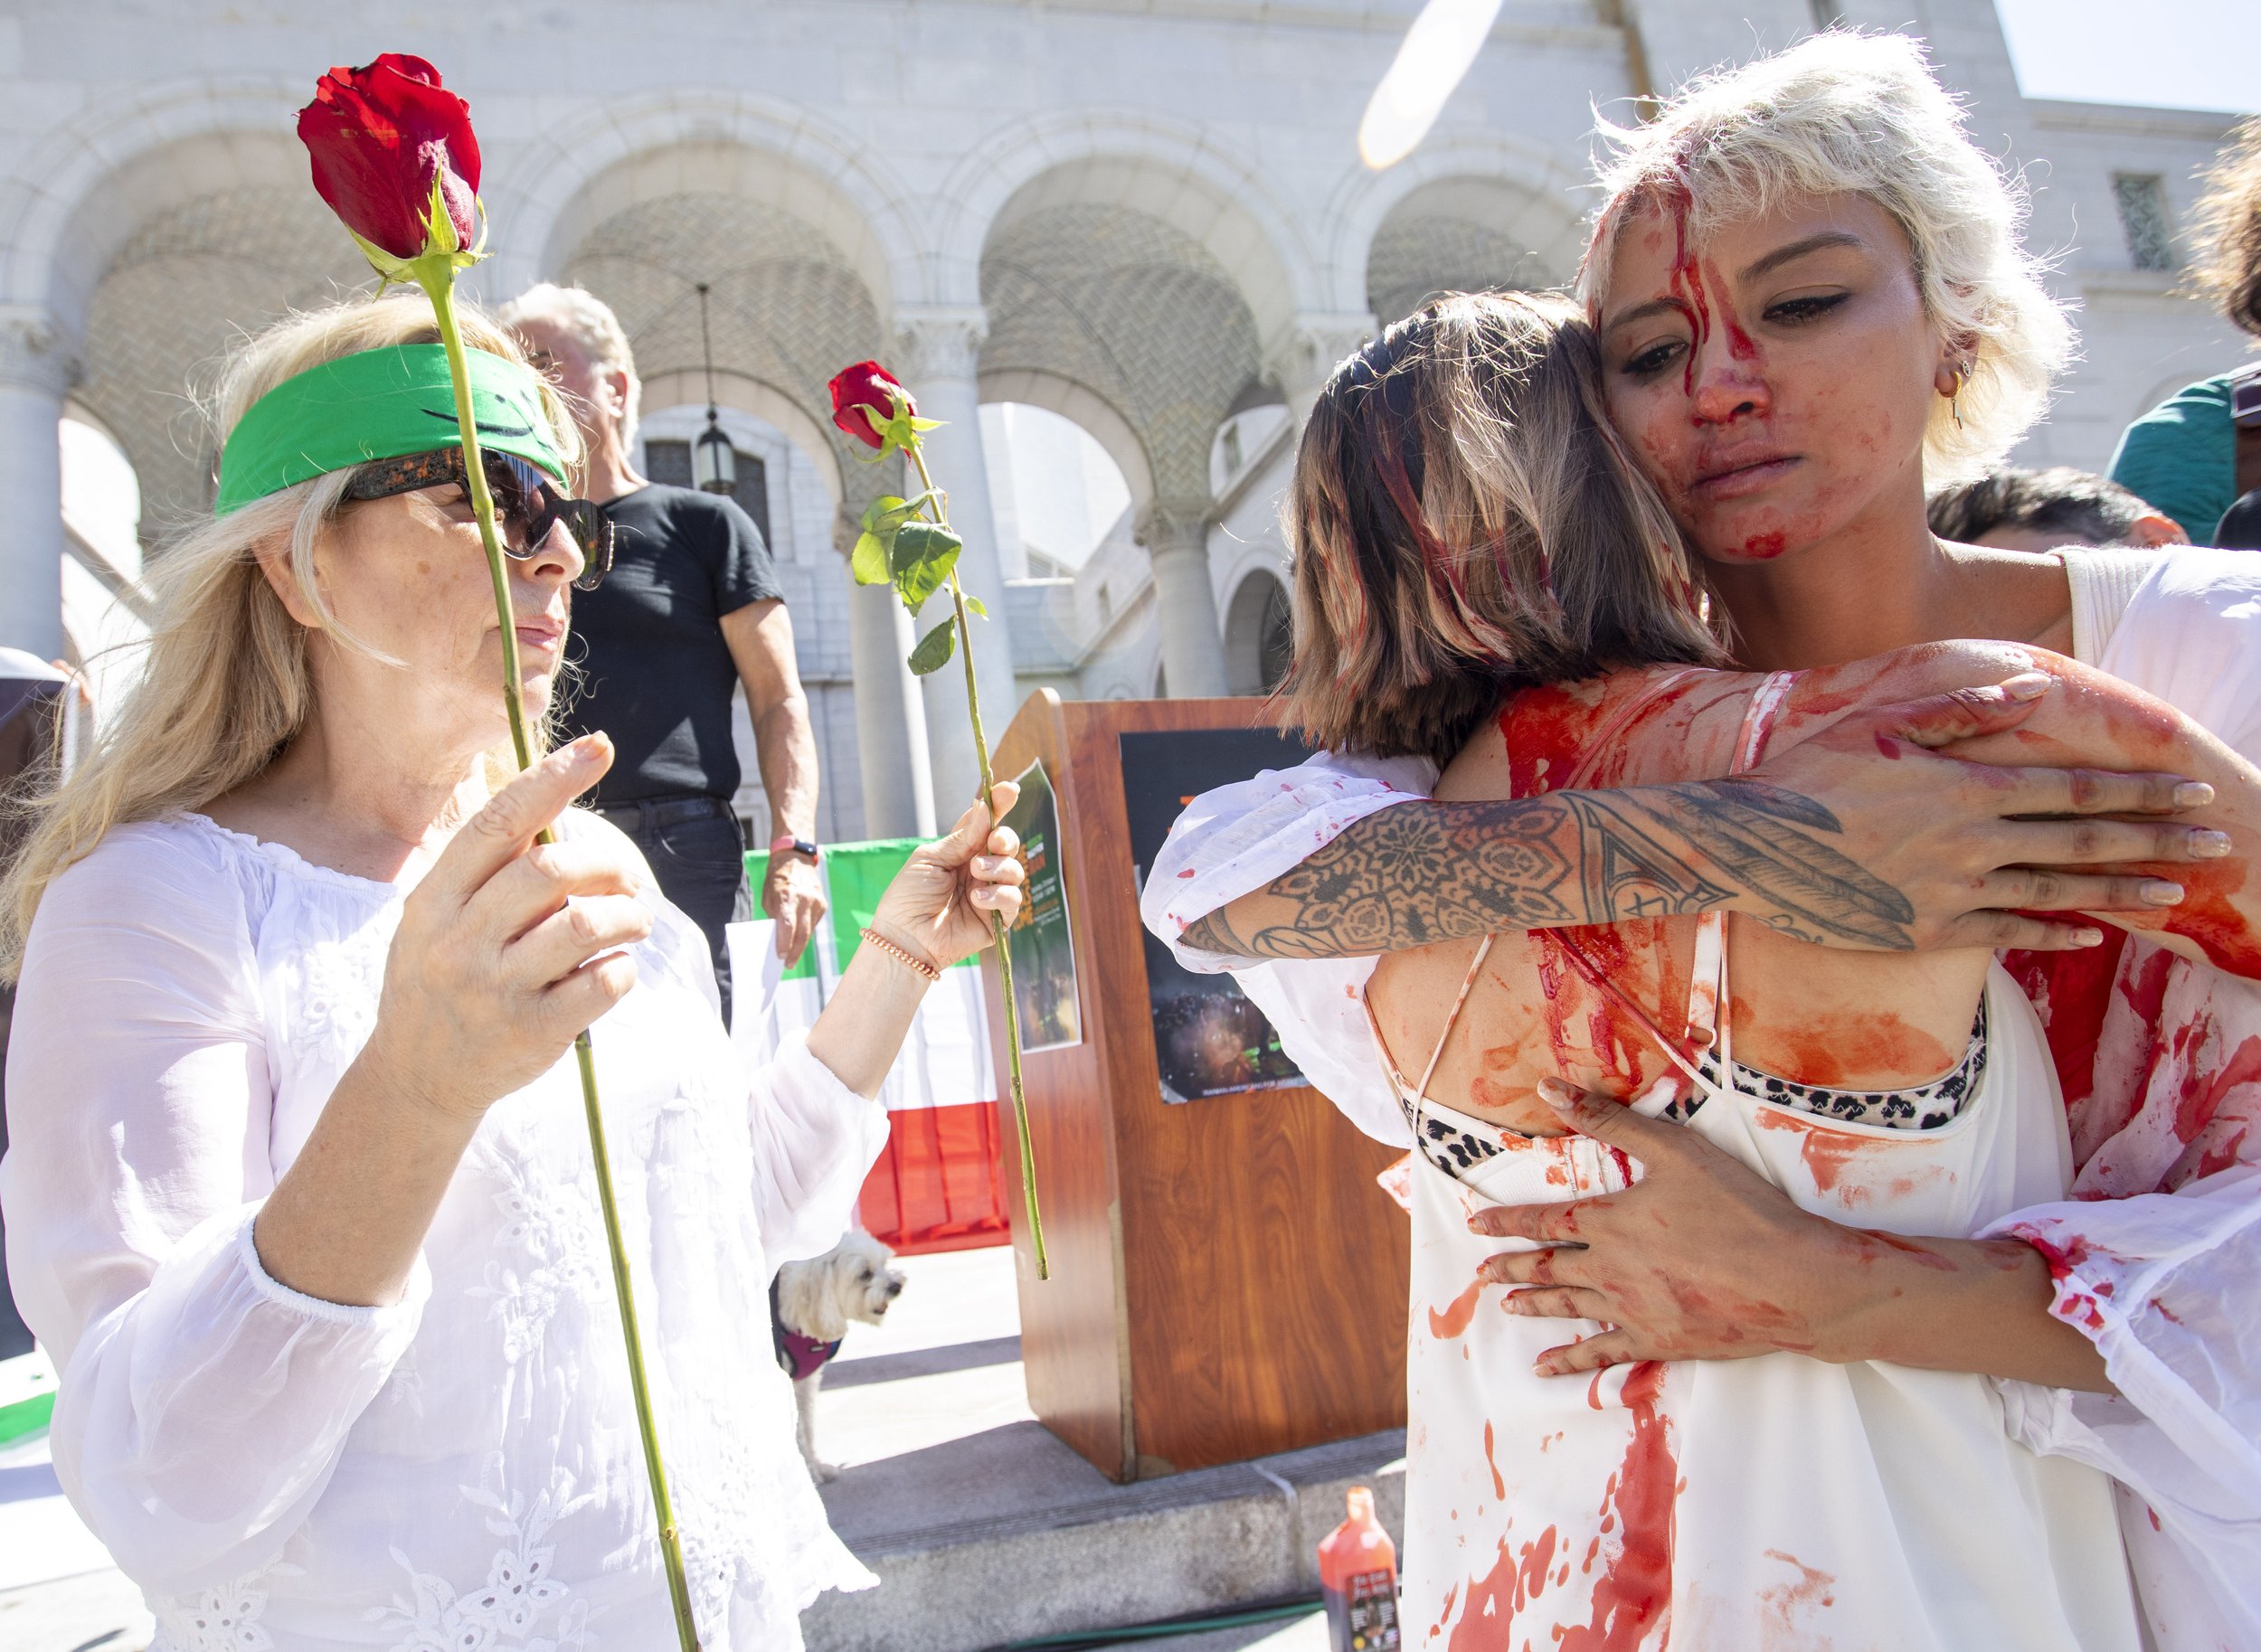  Artist Samantha Rose Moshiri  (right) hugs Yadriga Krasovskaya, as Nina Moyaer holds roses.  They are covered in fake blood from a performance in solidarity with Maha Amini outside City Hall  at a Freedom Rally for Iran in  Downtown Los Angeles, par